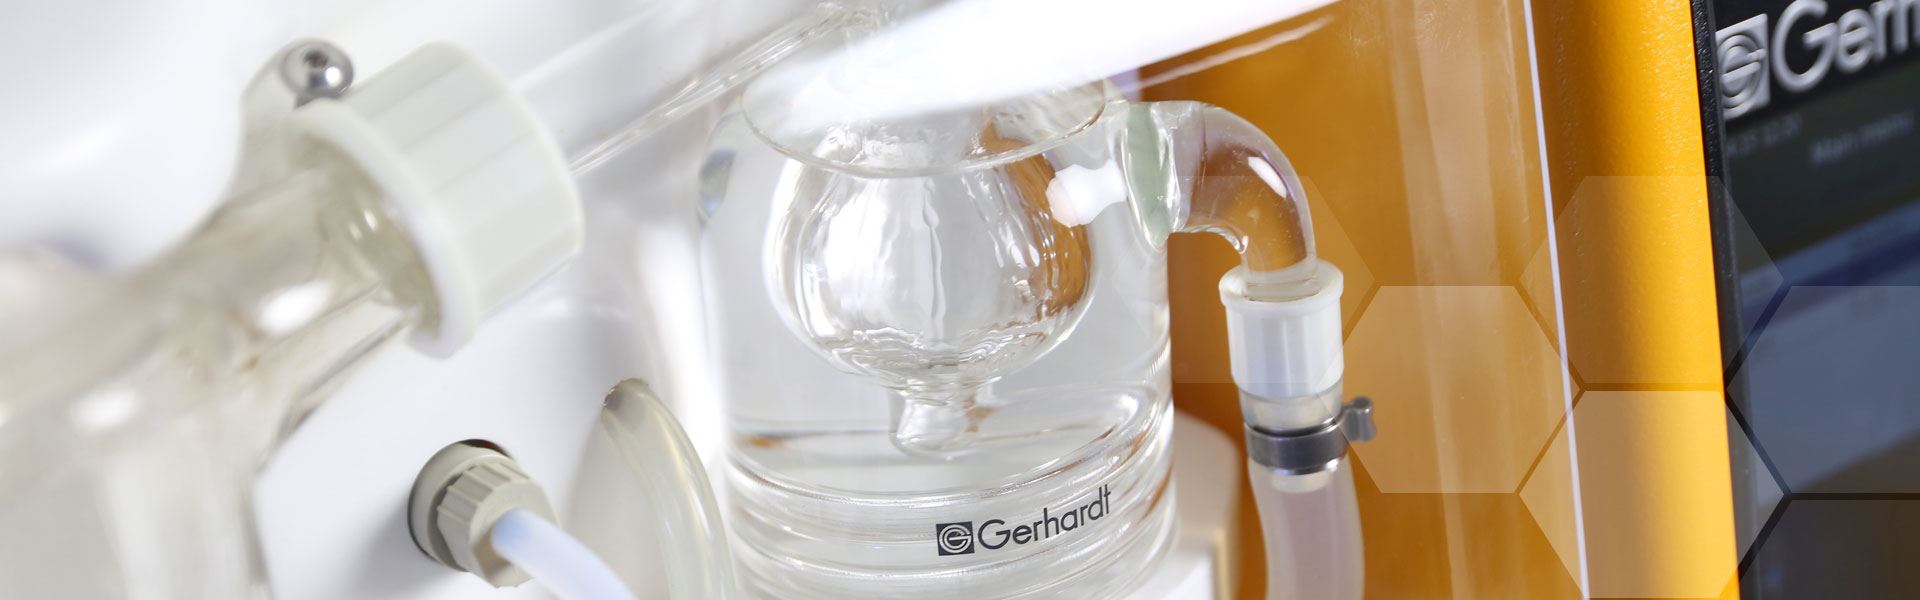 Gerhardt Laboratory Equipment for almost every industry across the world